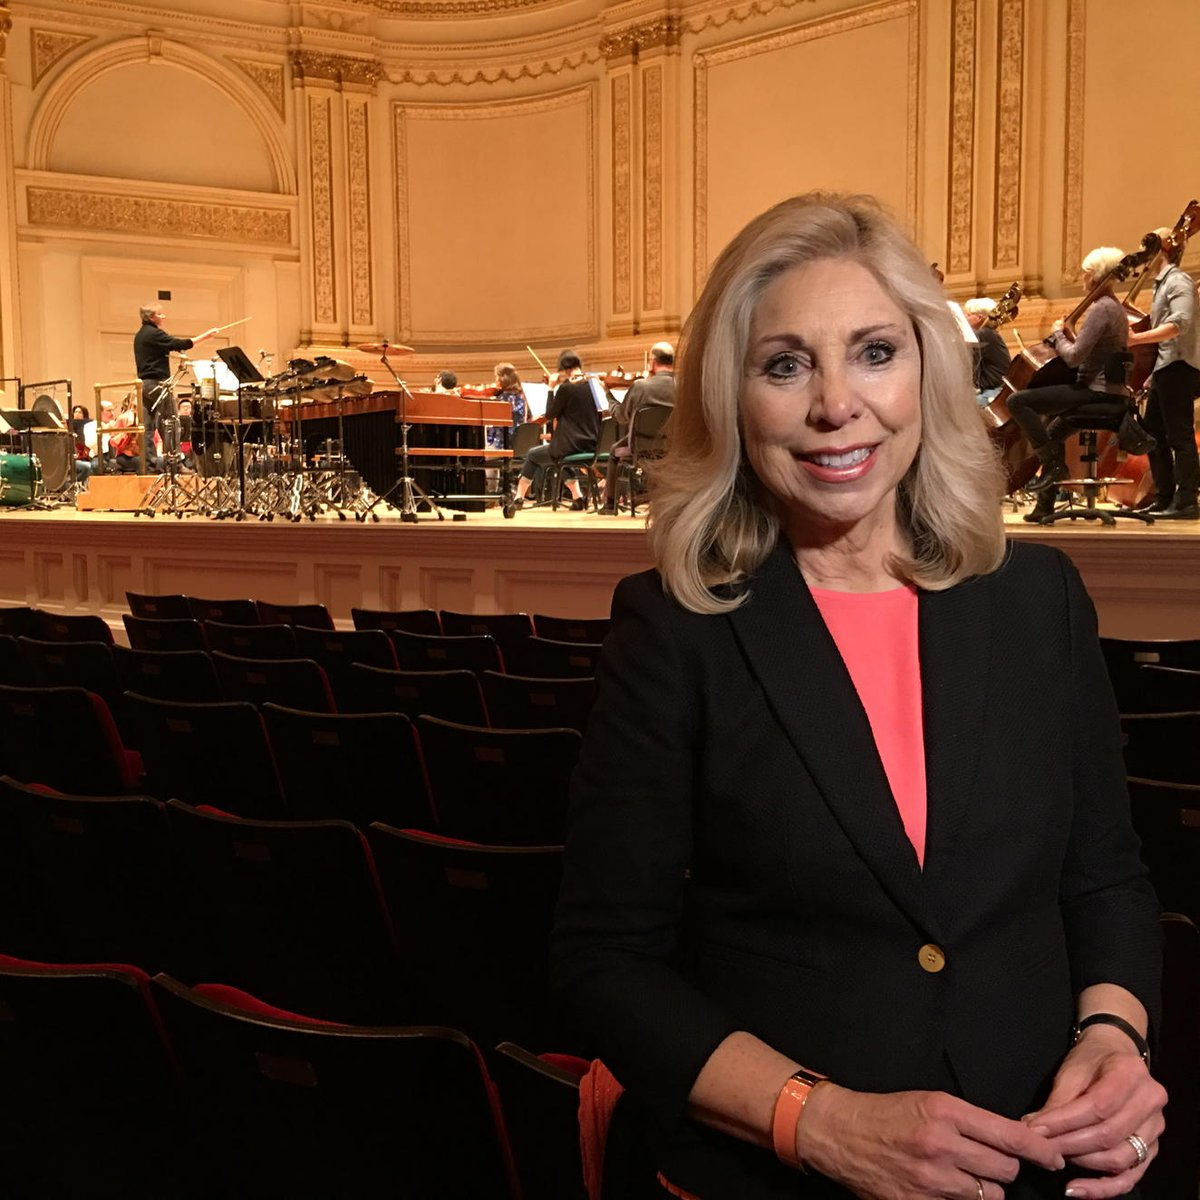 Utah Symphony performs in Carnegie Hall. Join me at 5, 6 and 10 on KSL 5 News!